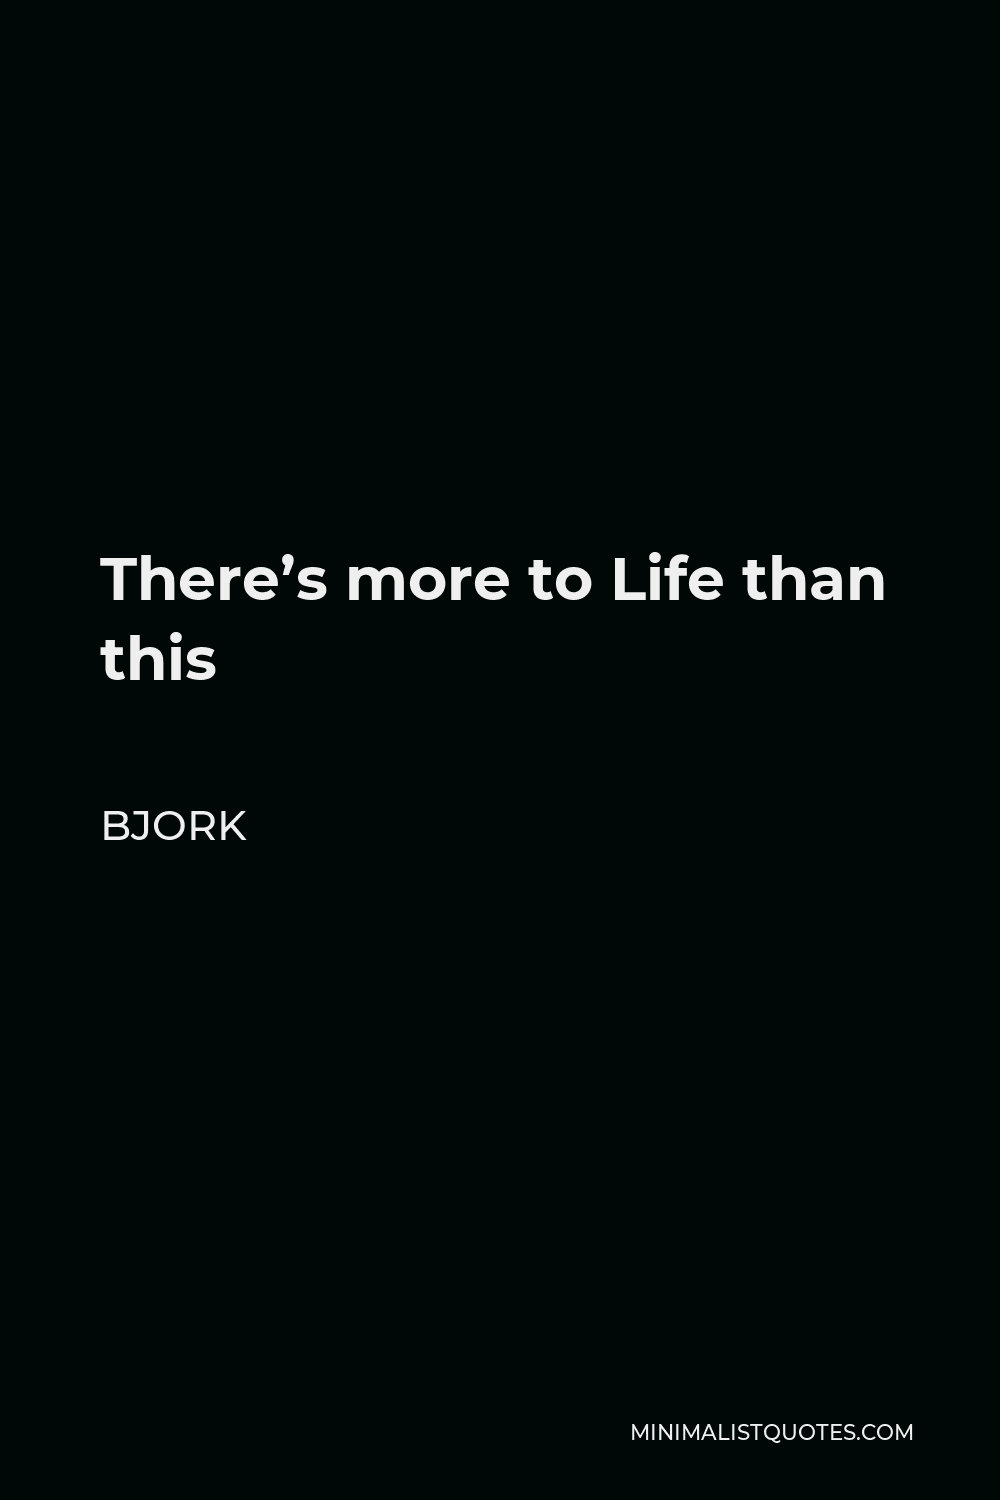 Bjork Quote - There’s more to Life than this